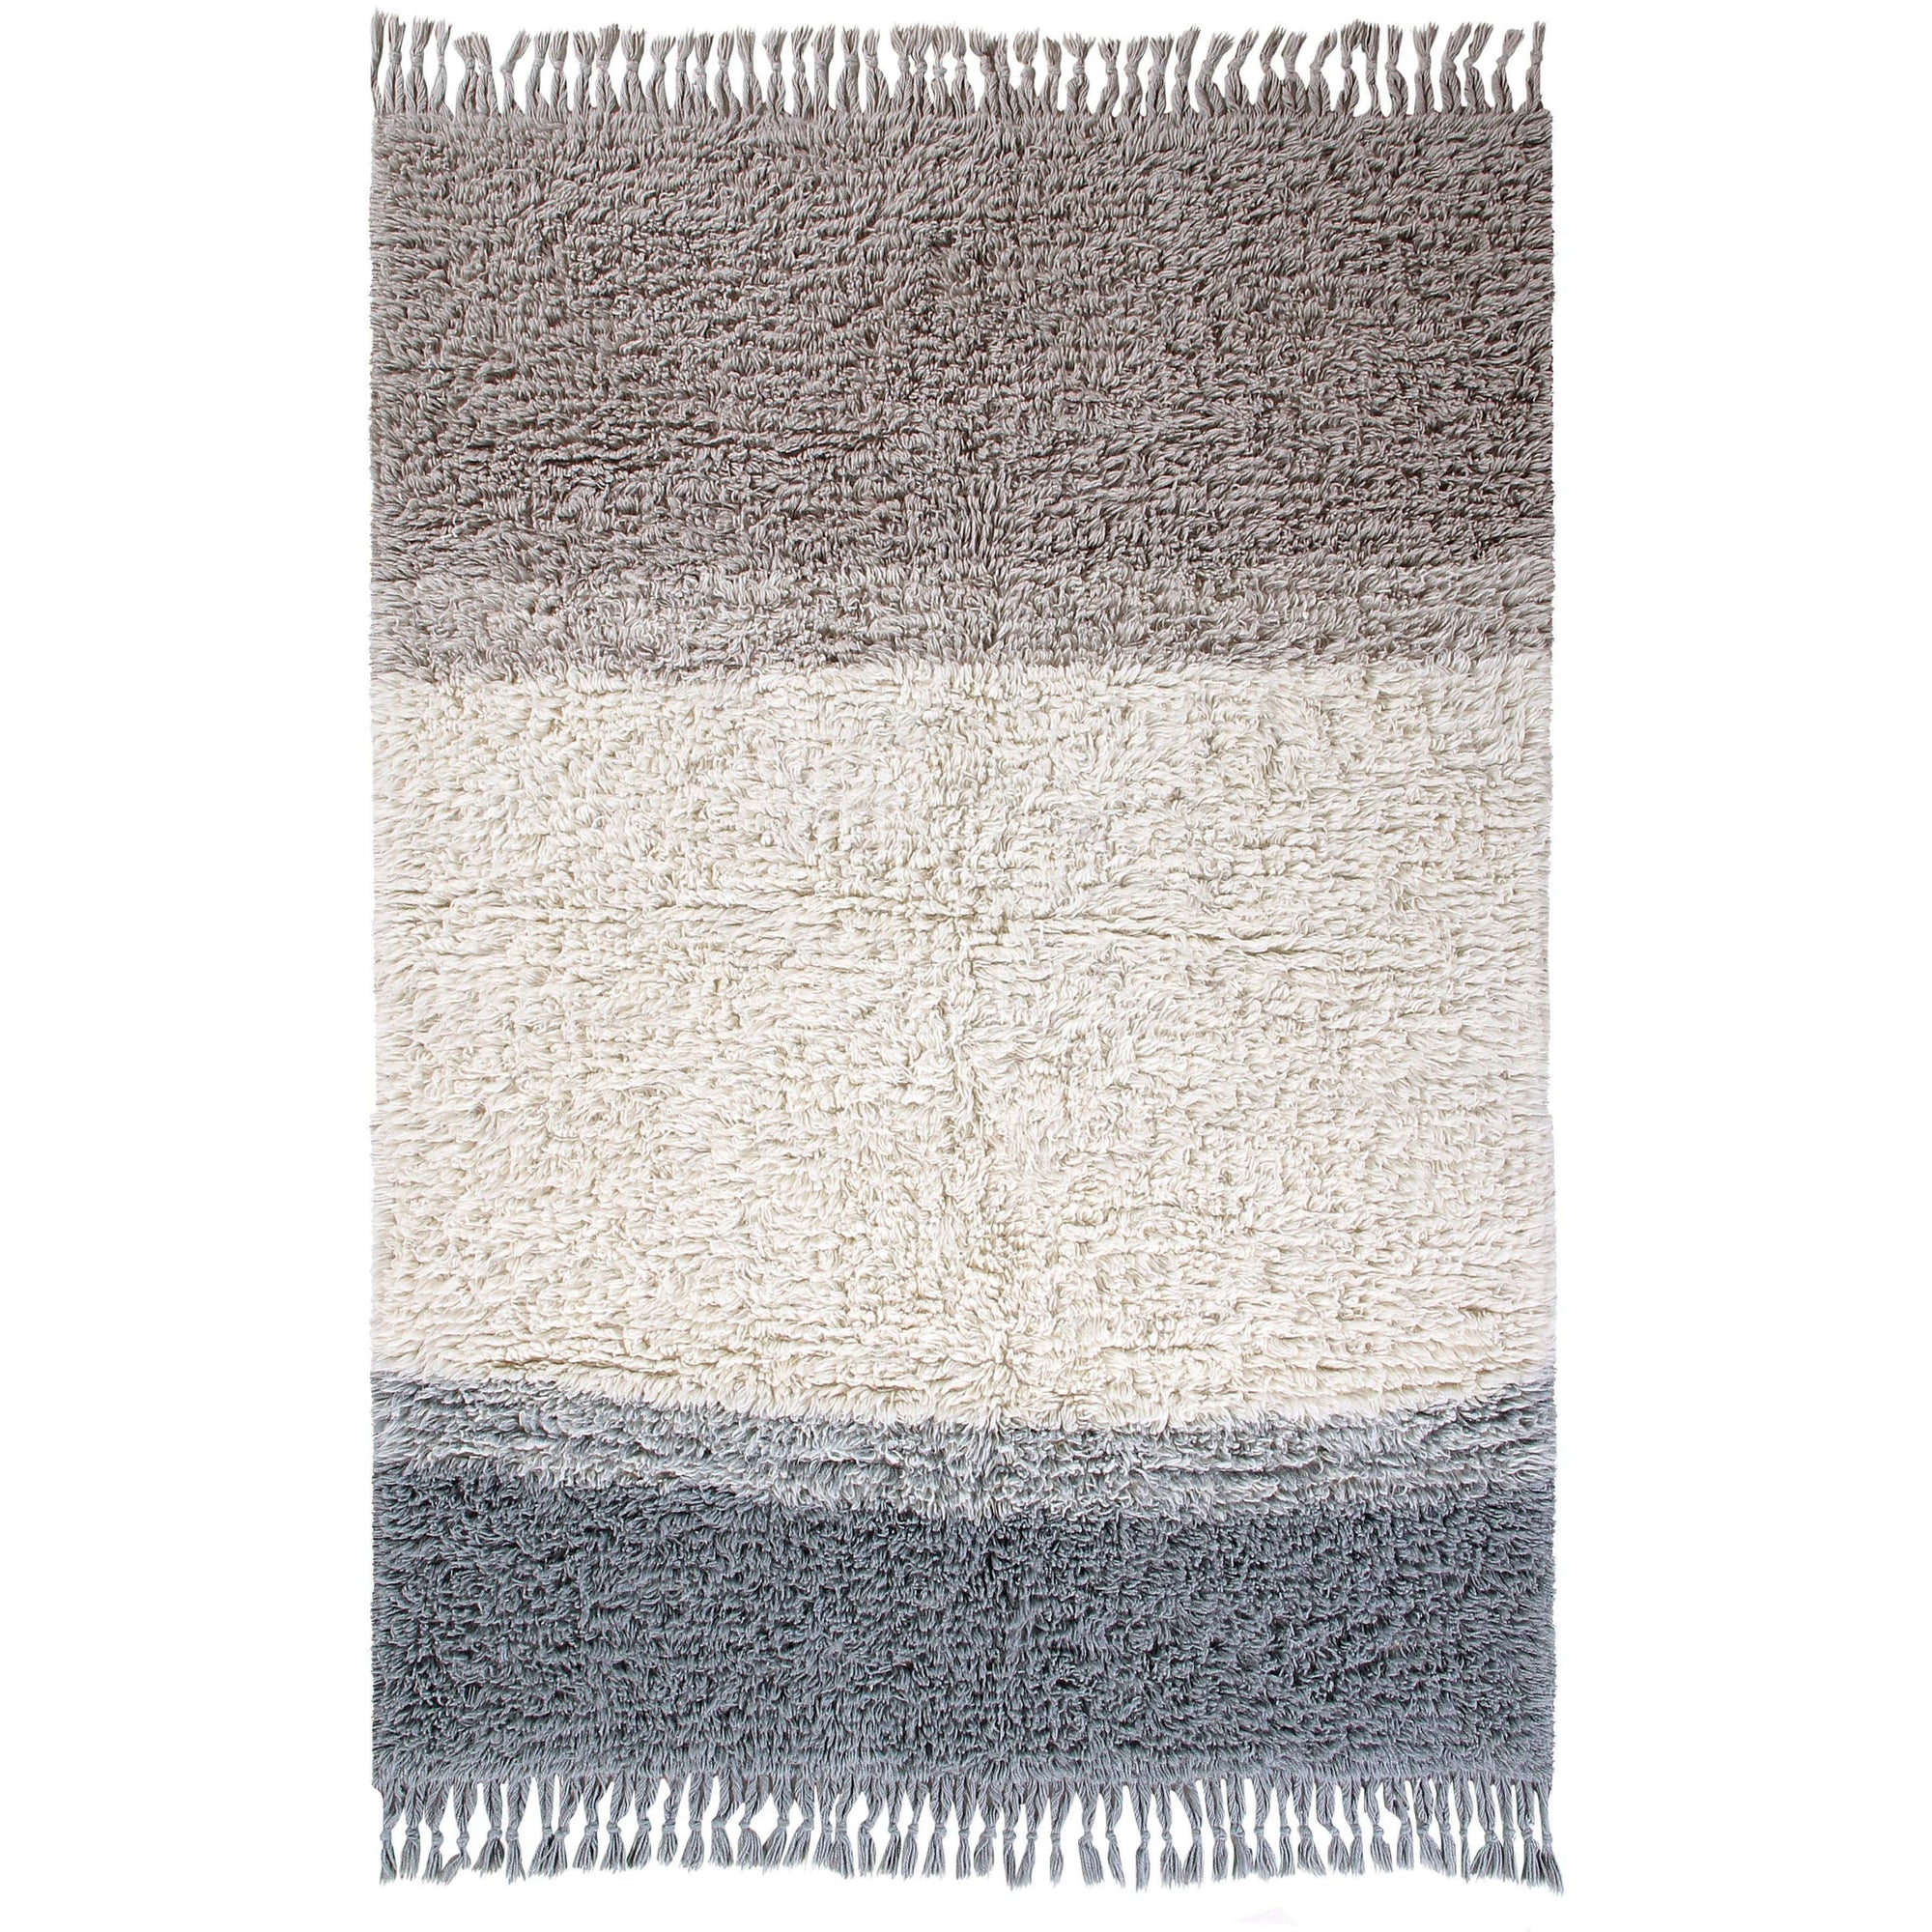 Wool Area Rugs: Natural, toxic-free, hypoallergenic, baby & kids safe - Rugs  by Roo